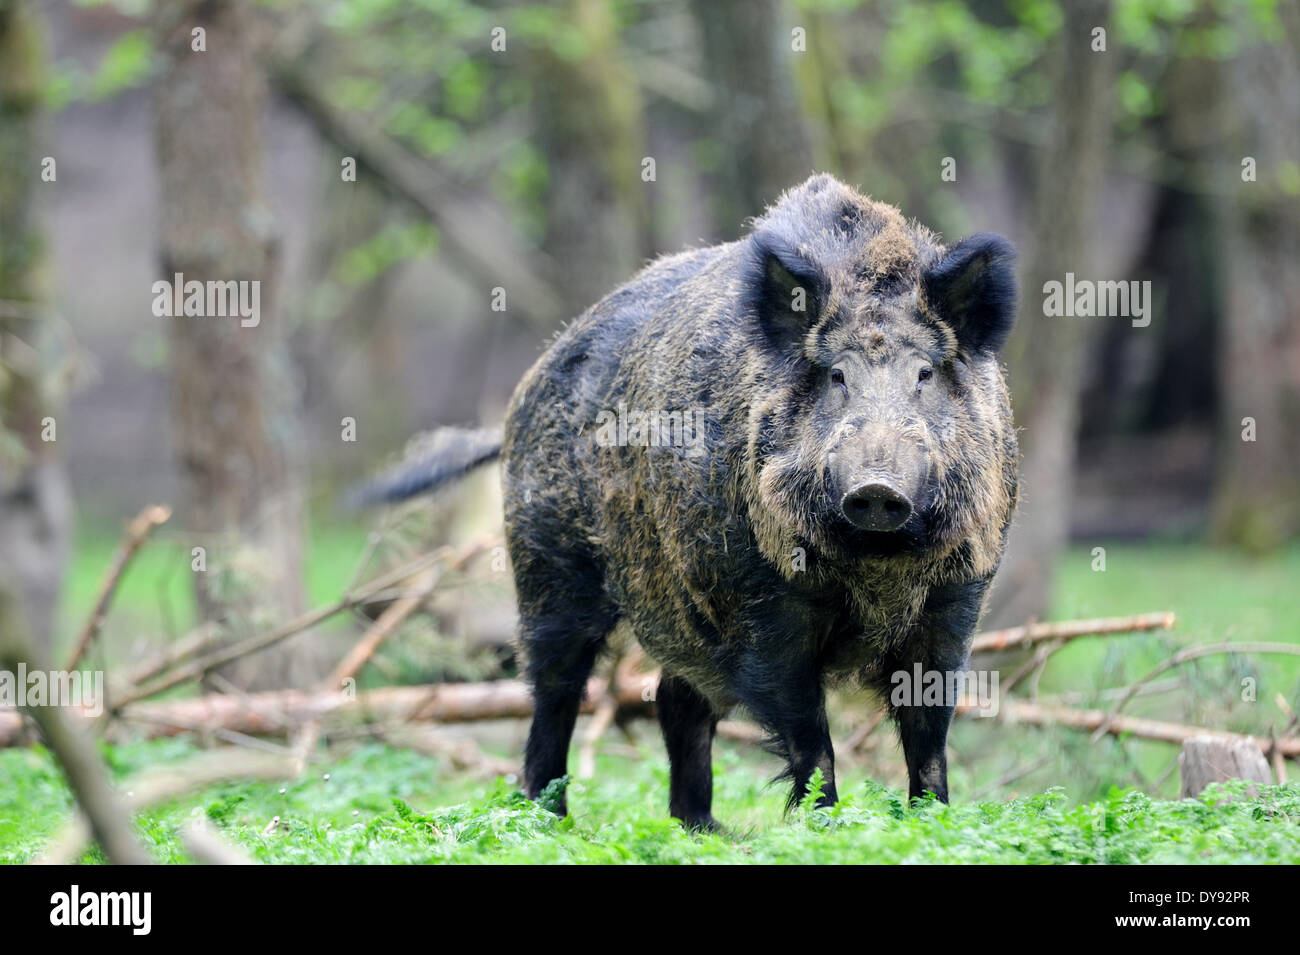 Wild boar Sus scrofa scrofa sow sows wild boars cloven-hoofed animal pigs pig vertebrates mammals boars fur changes April ani Stock Photo